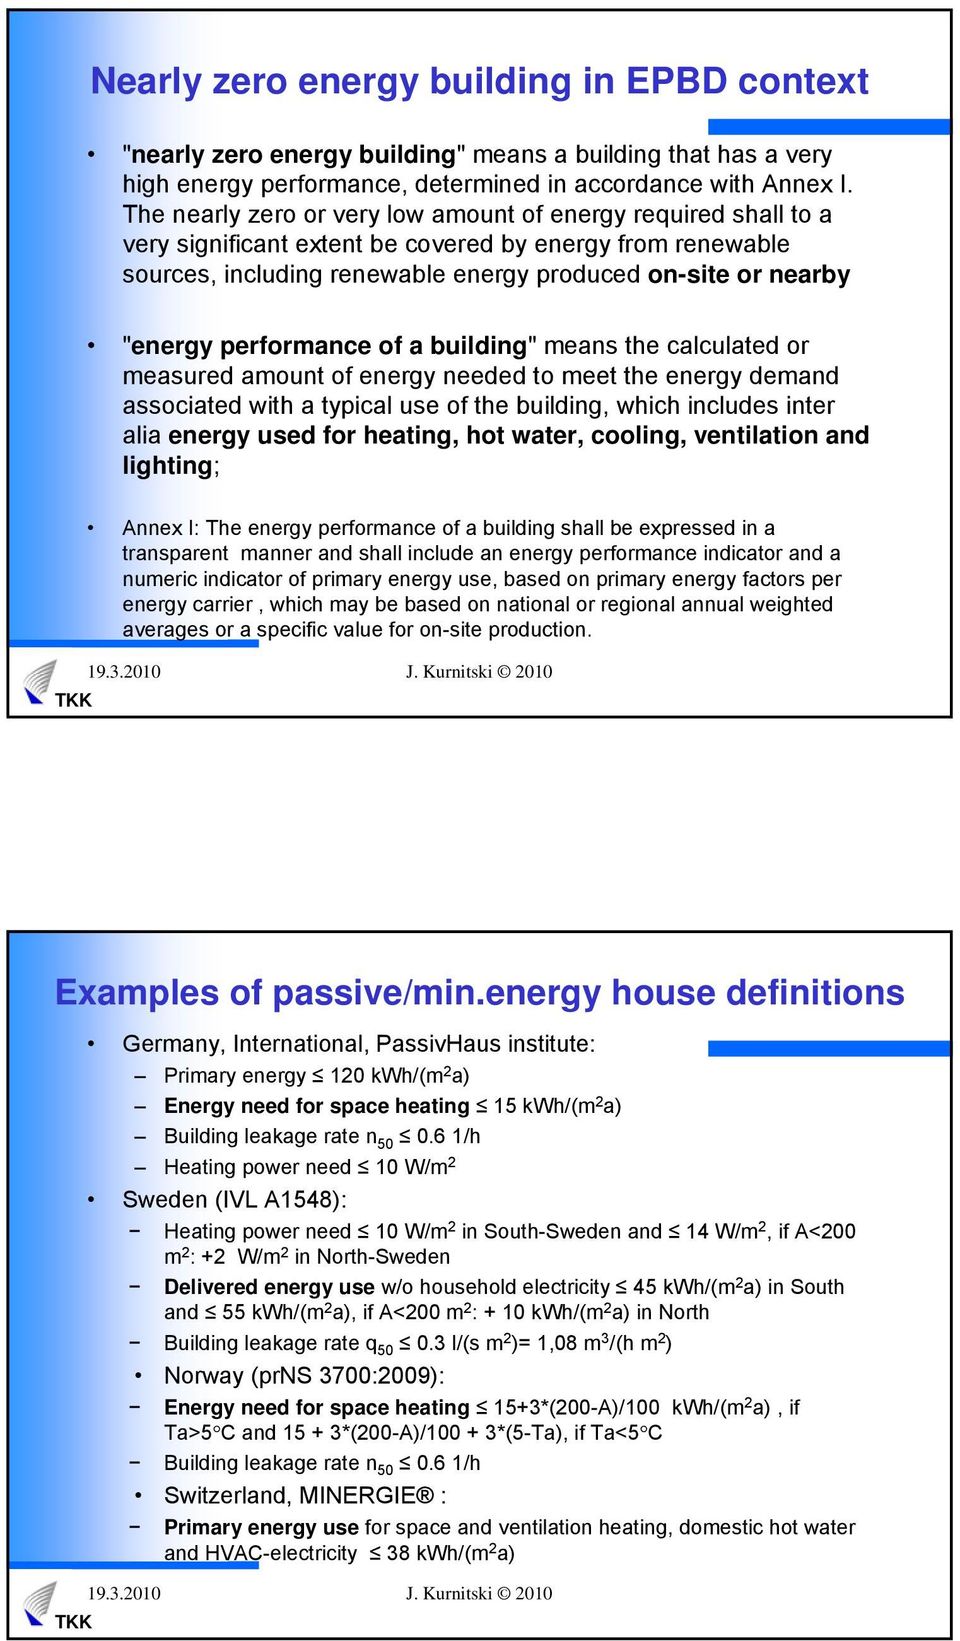 performance of a building" means the calculated or measured amount of energy needed to meet the energy demand associated with a typical use of the building, which includes inter alia energy used for